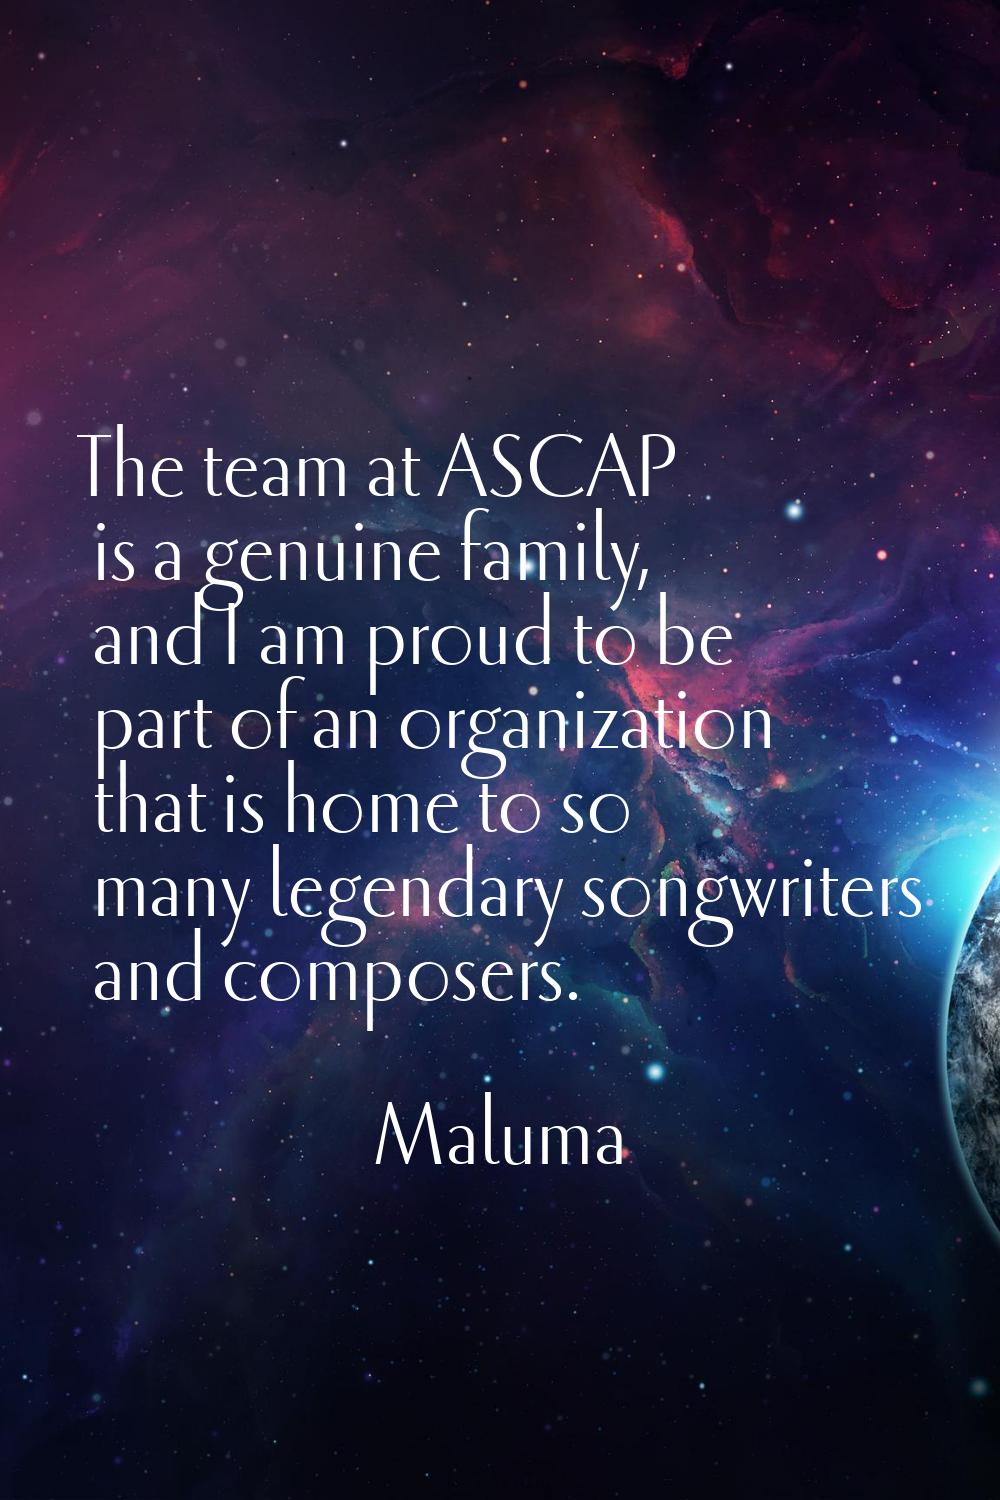 The team at ASCAP is a genuine family, and I am proud to be part of an organization that is home to